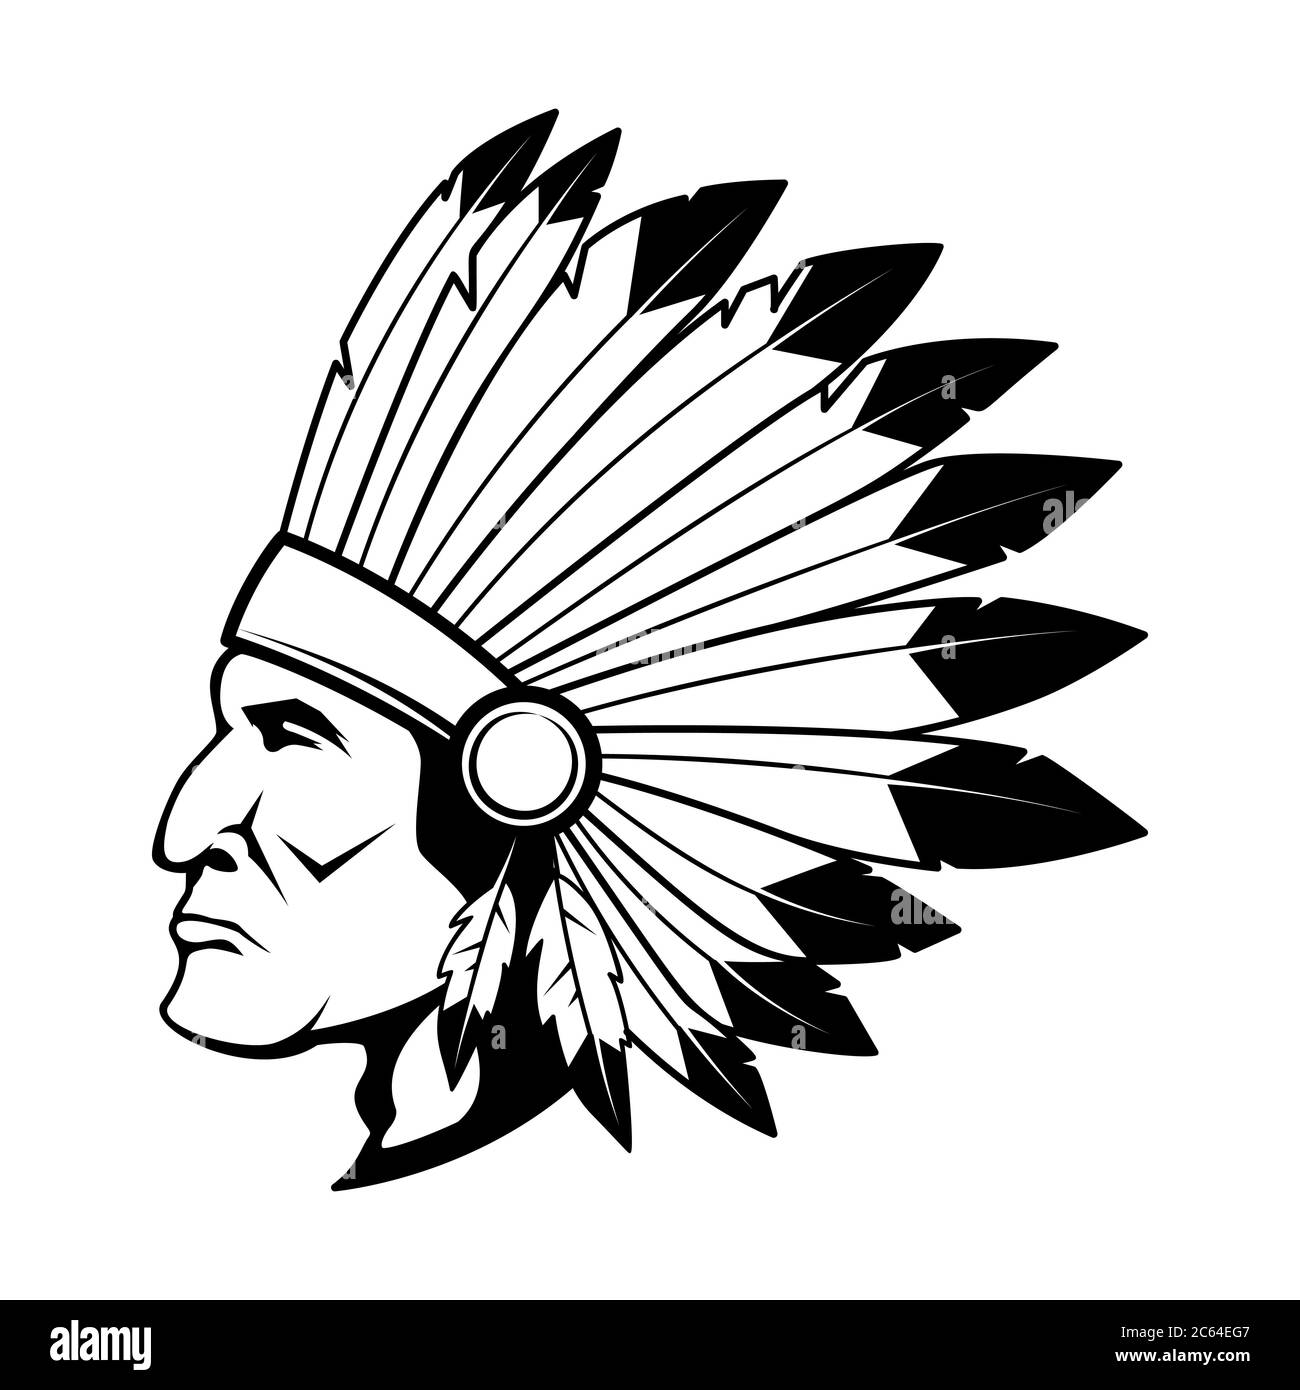 Illustration of native american chief head in traditional headdress.Design element for logo,label, sign, poster, card, t shirt. Vector illustration Stock Vector